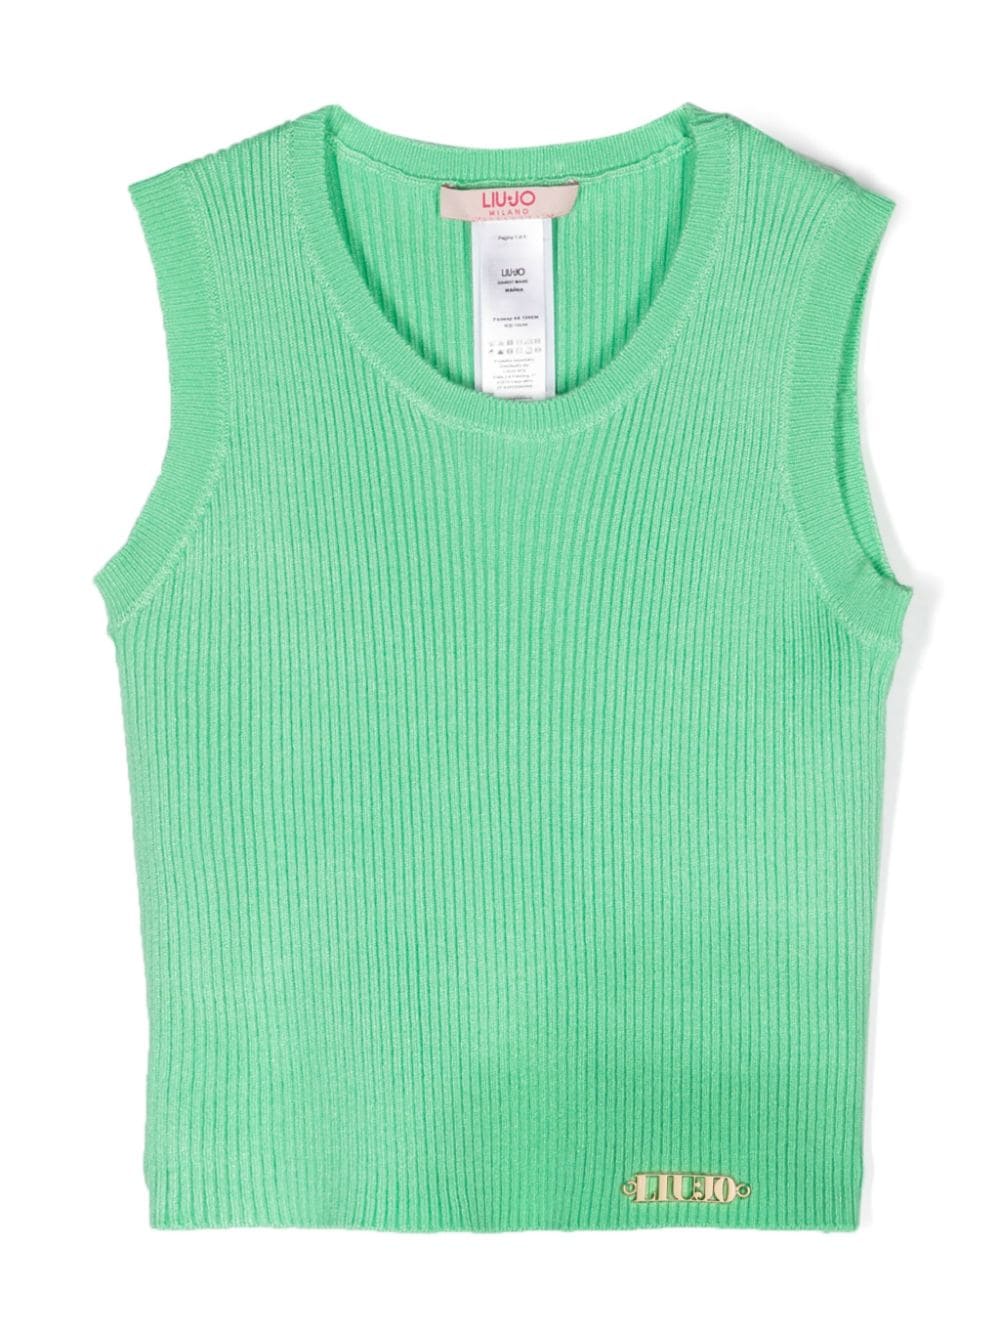 Green top for girls